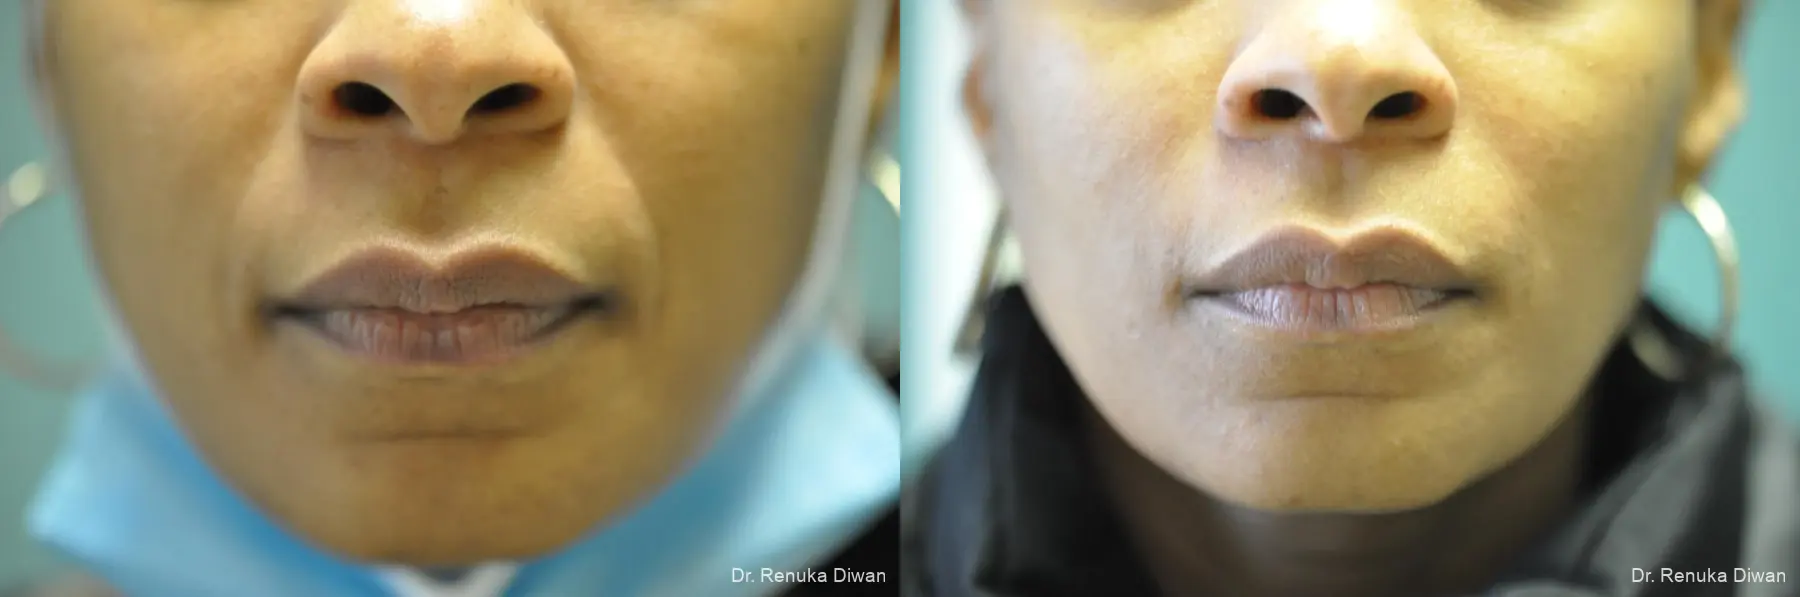 Smile Lines: Patient 11 - Before and After 1